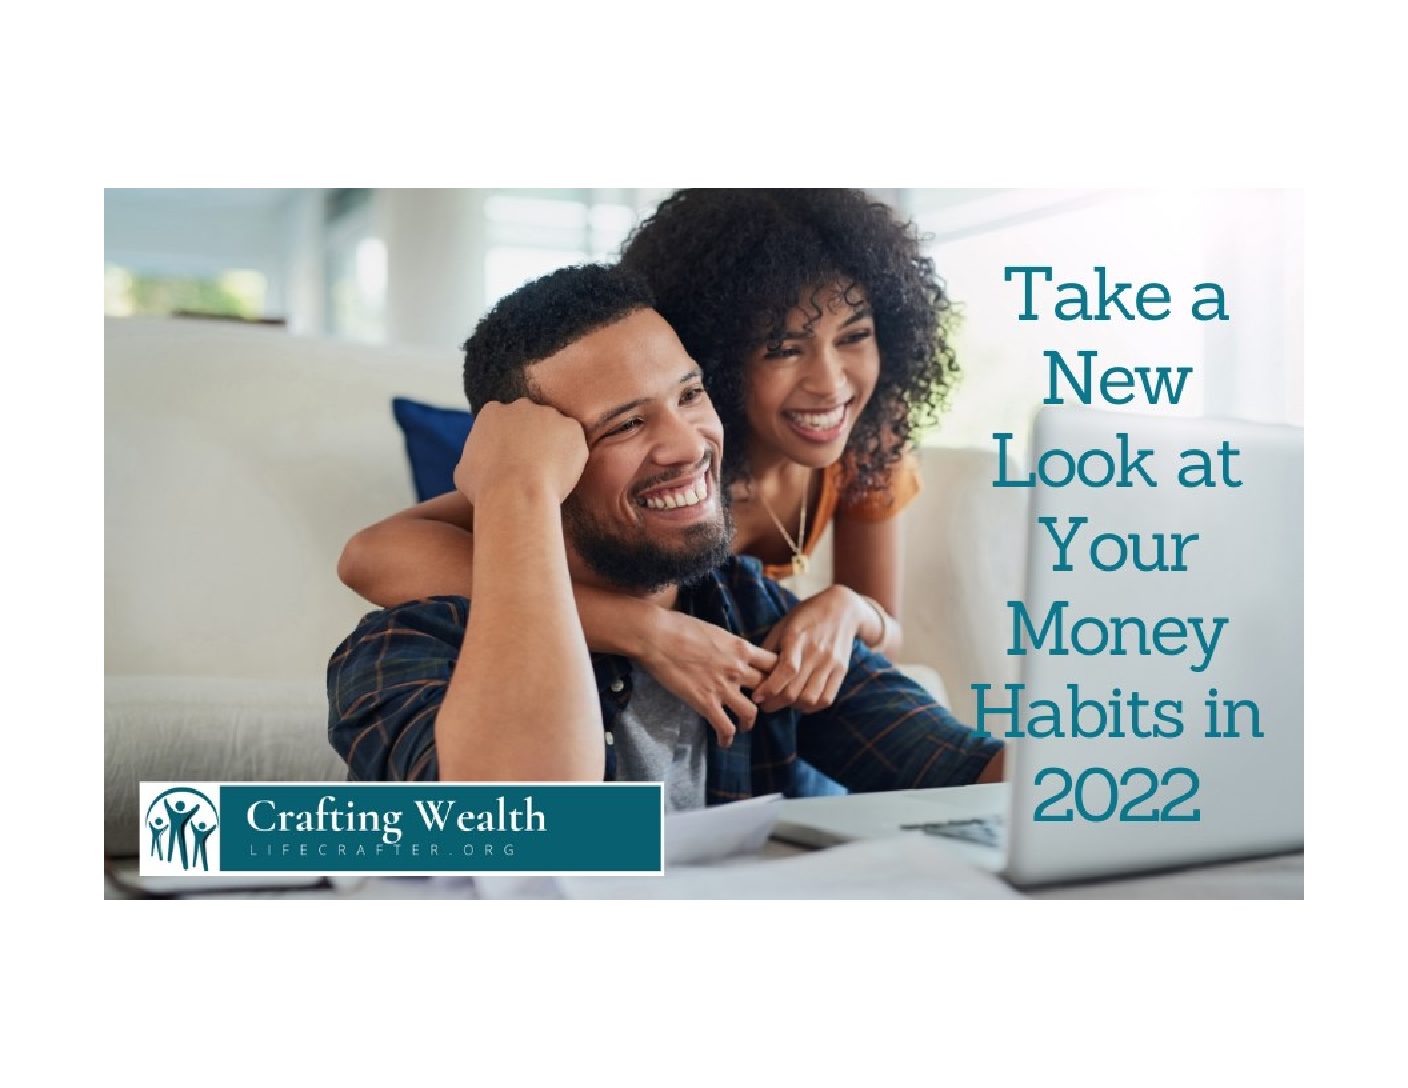 Take a New Look at Your Money Habits